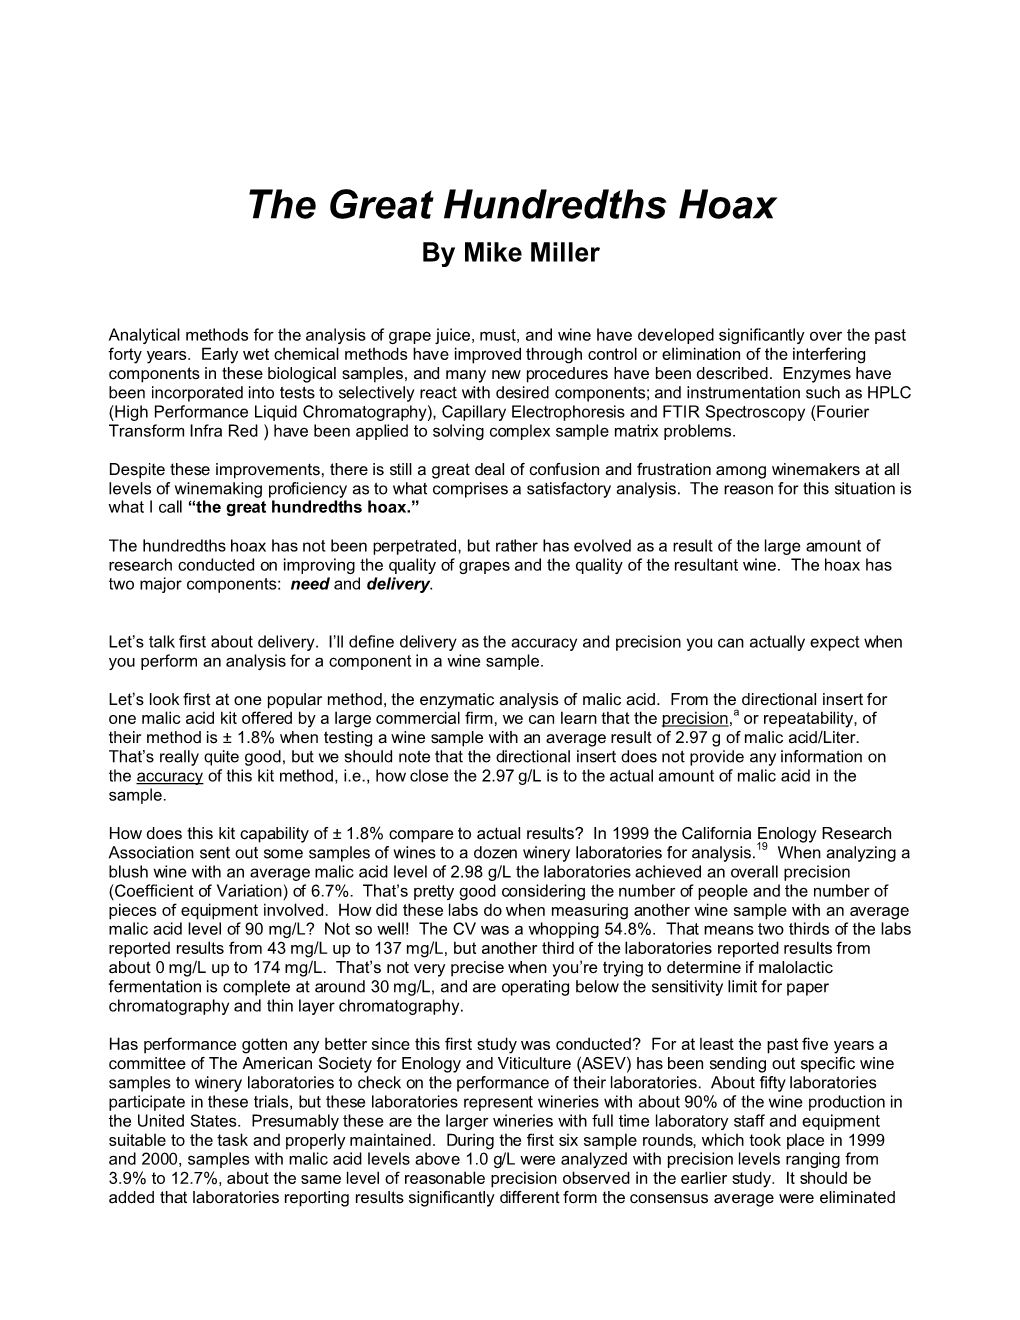 The Great Hundredths Hoax by Mike Miller